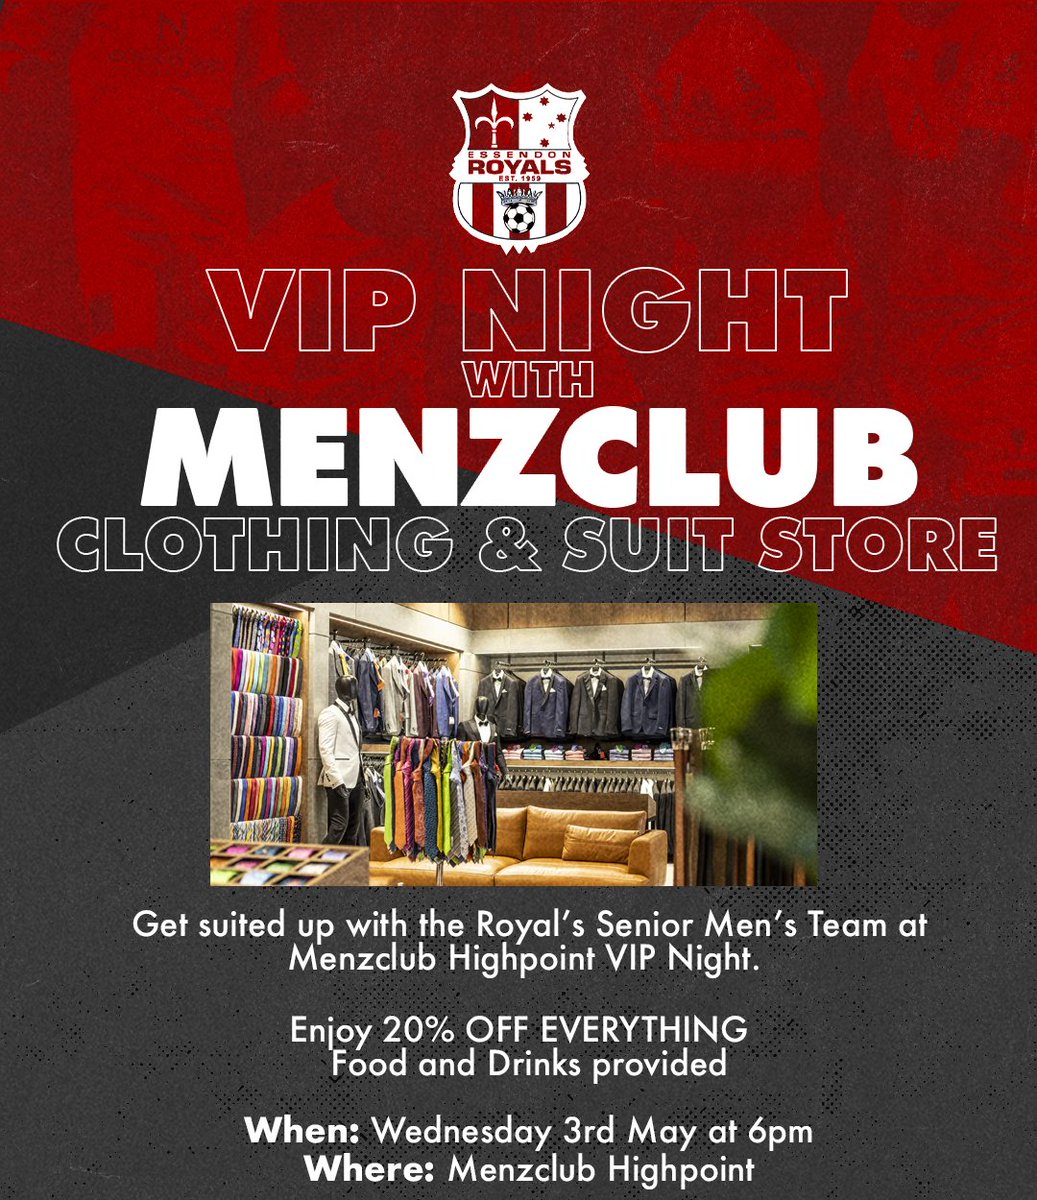 TONIGHT! NOT TOO LATE TO RSVP!

🎩👔 Essendon Royals x MenzClub VIP Night! 👔🎩

Attention all Royals members! Menzclub is hosting an exclusive VIP night just for YOU!

💰 20% off storewide for Royals members & their guests

REGISTER: form.jotform.com/231031197677862